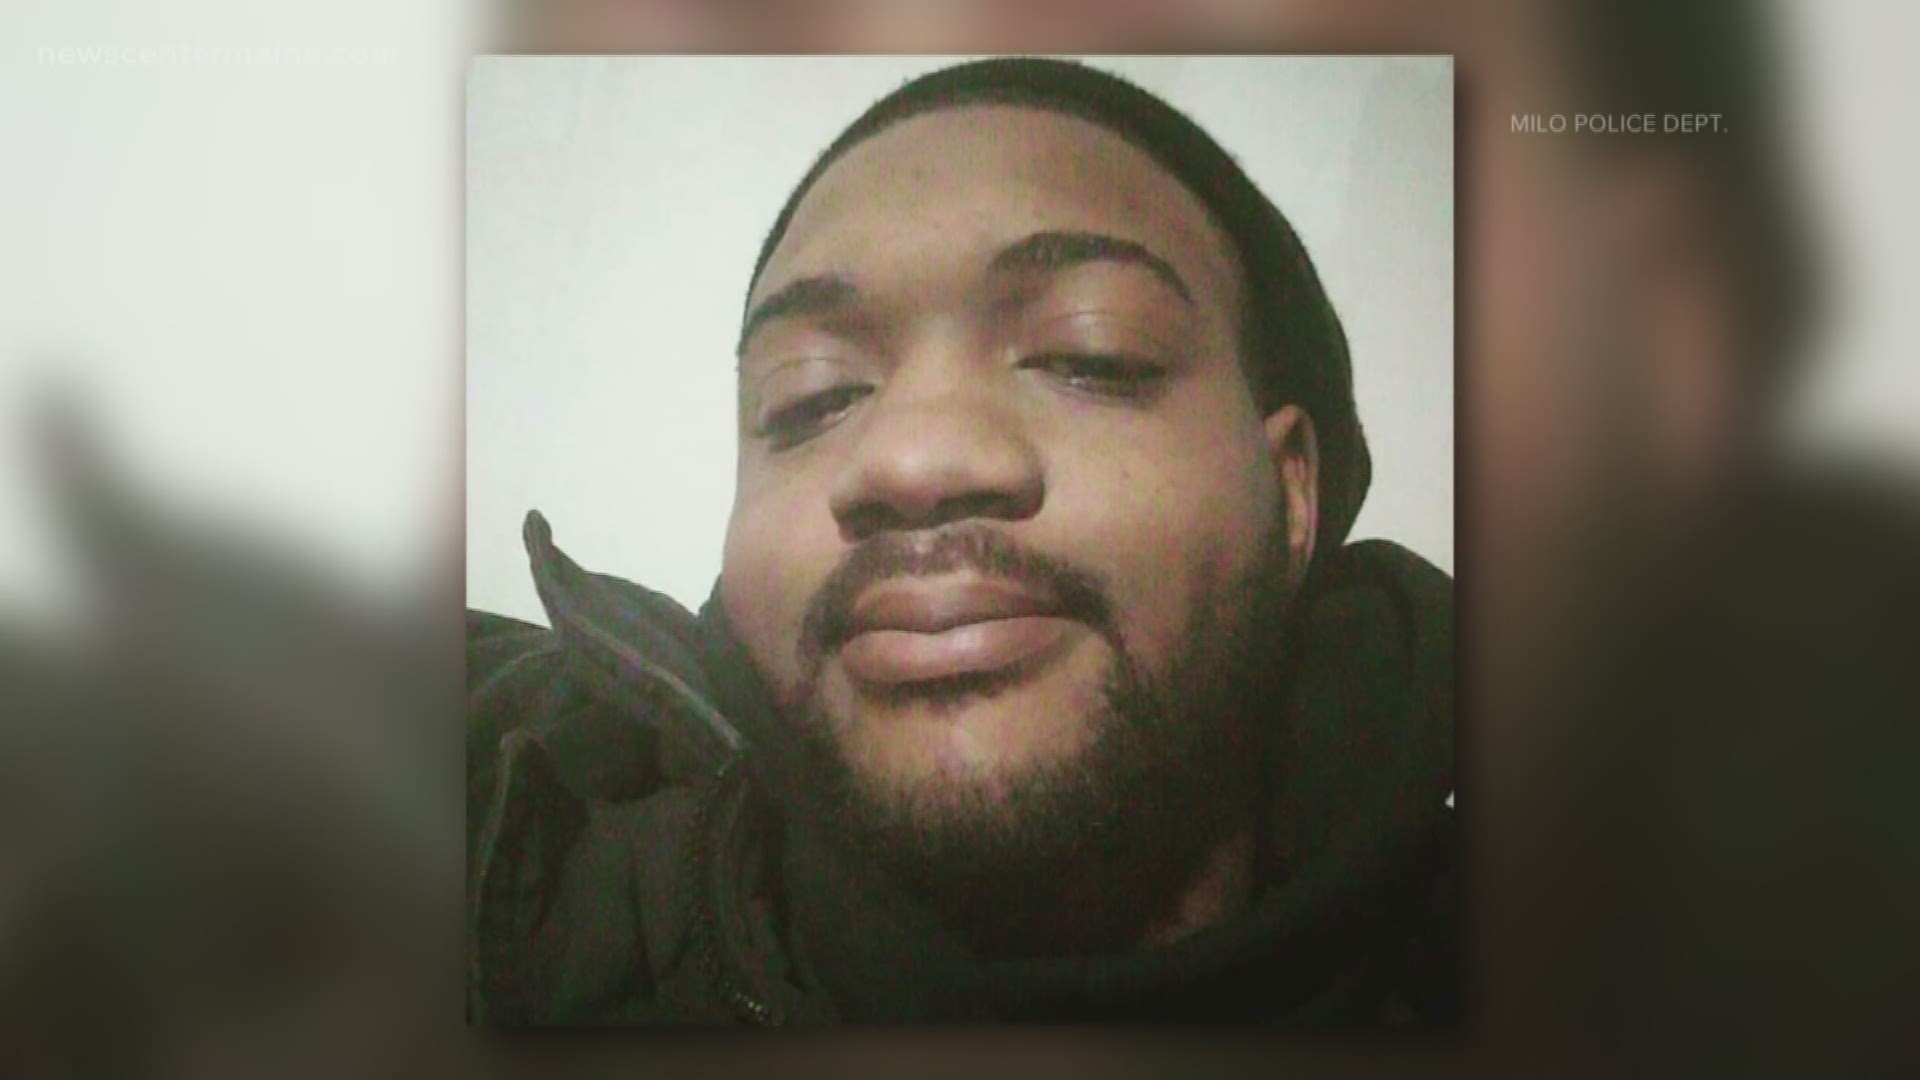 Police in Milo are still looking for Cevonte Johnson who's been missing for two weeks.